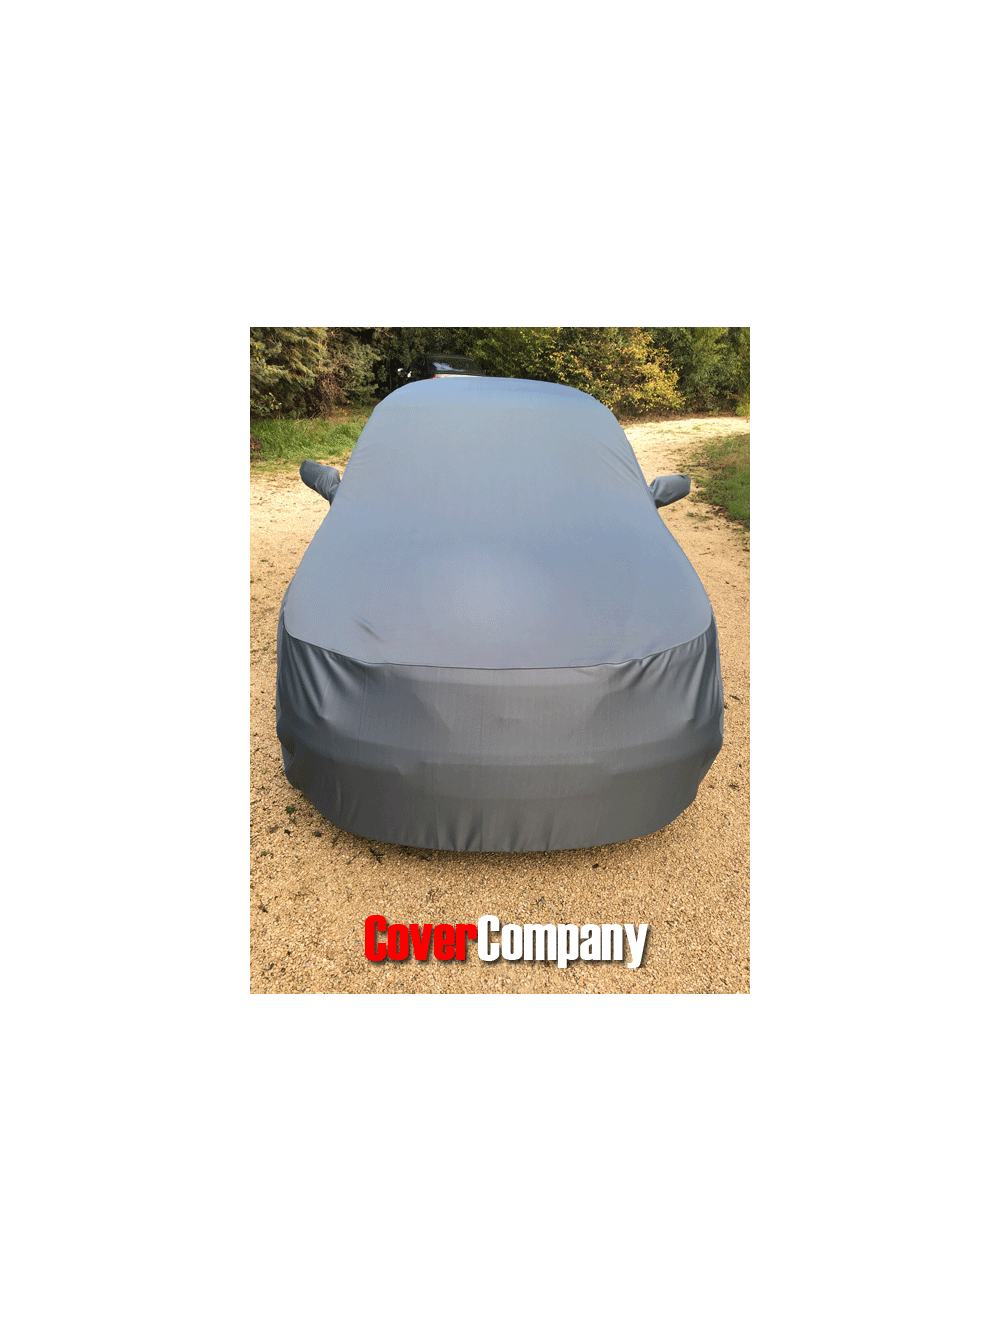 Custom Outdoor Car cover for SAAB. Waterproof car cover for SAAB